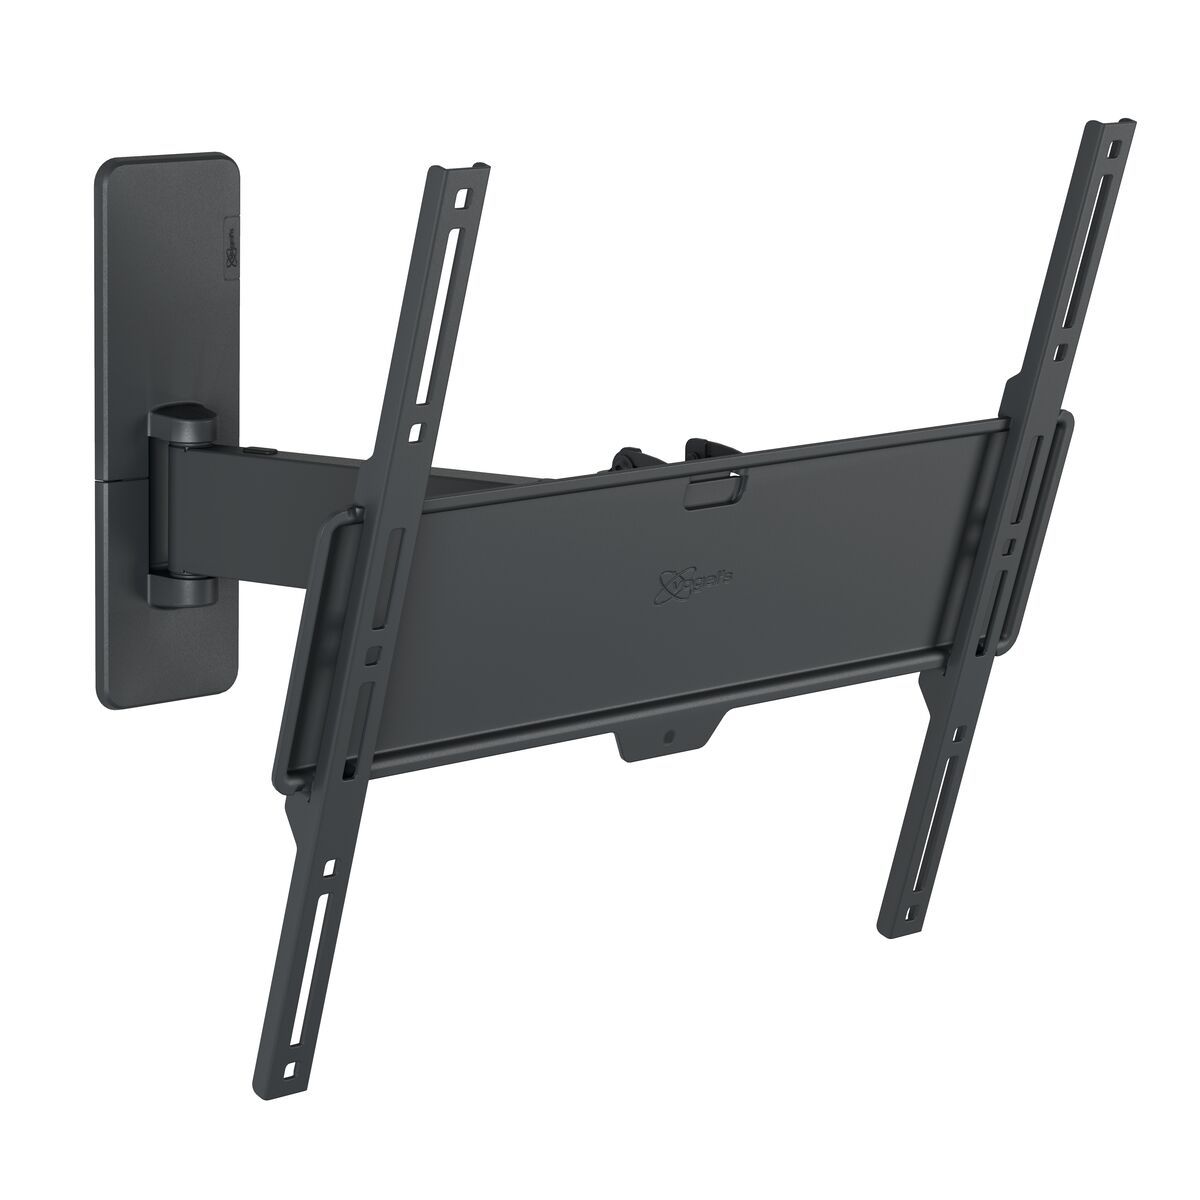 Vogel's TVM 1425 Full-Motion TV Wall Mount - Suitable for 32 up to 65 inch TVs - Motion (up to 120°) swivel - Tilt up to 15° - Product